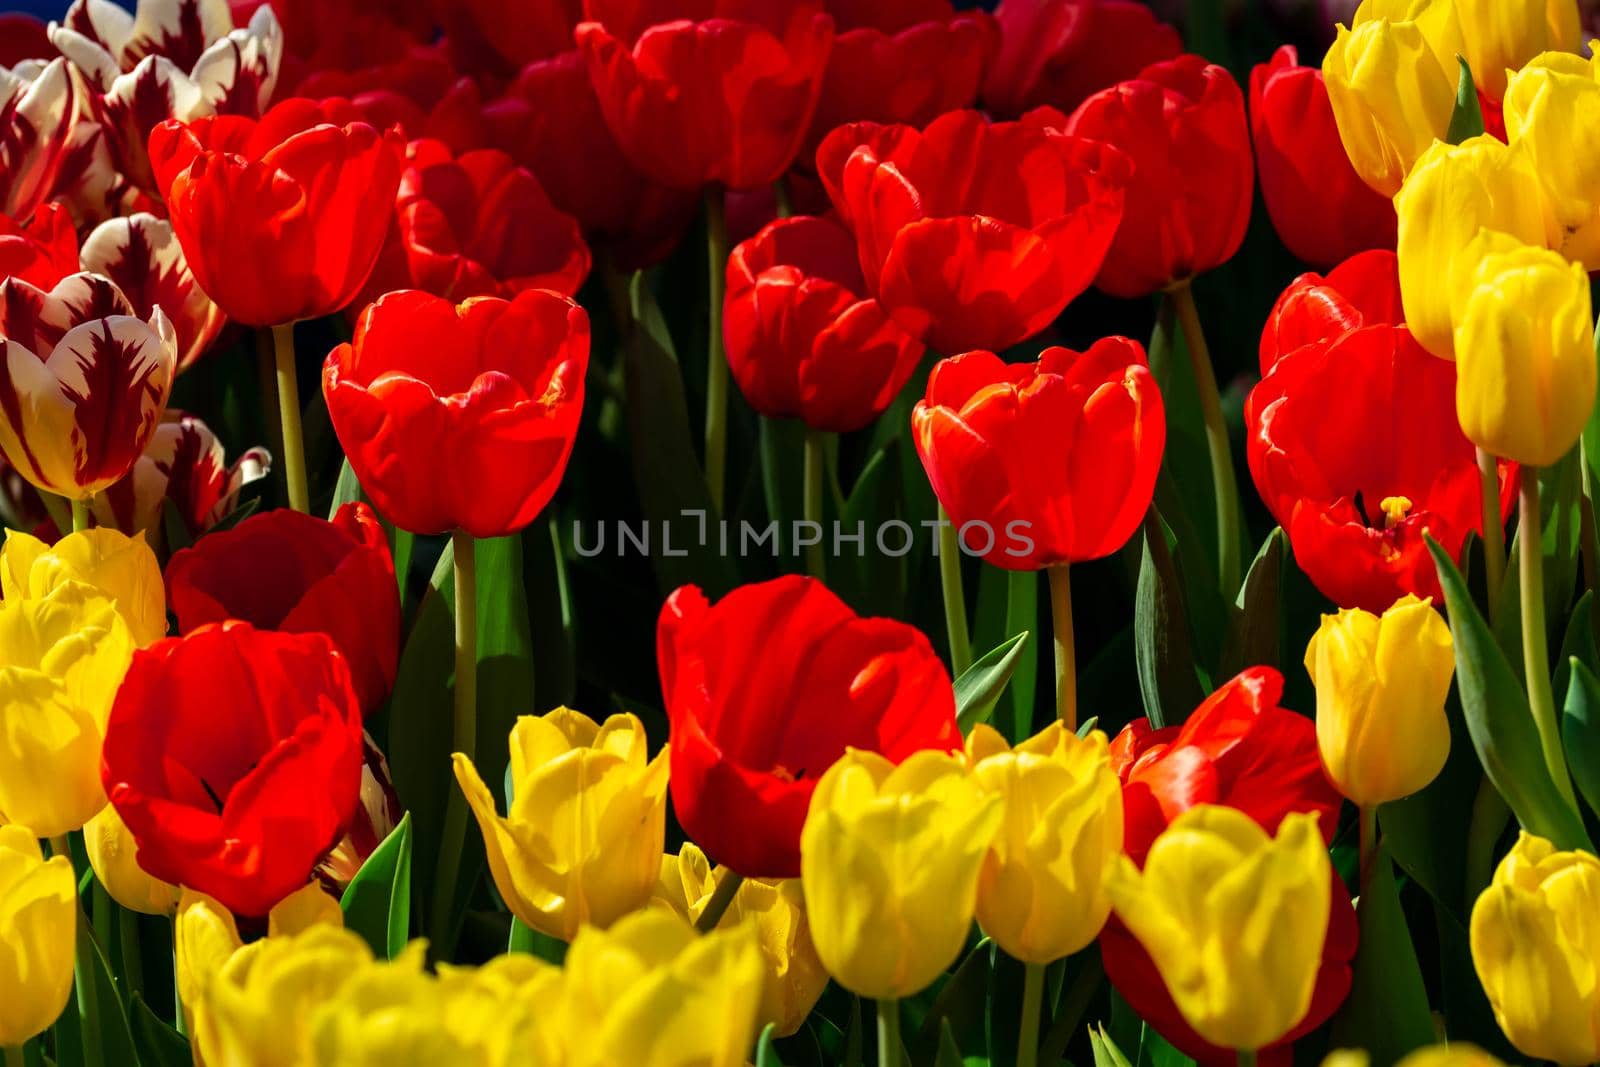 Bed of yellow and red flowers with blurry background by billroque